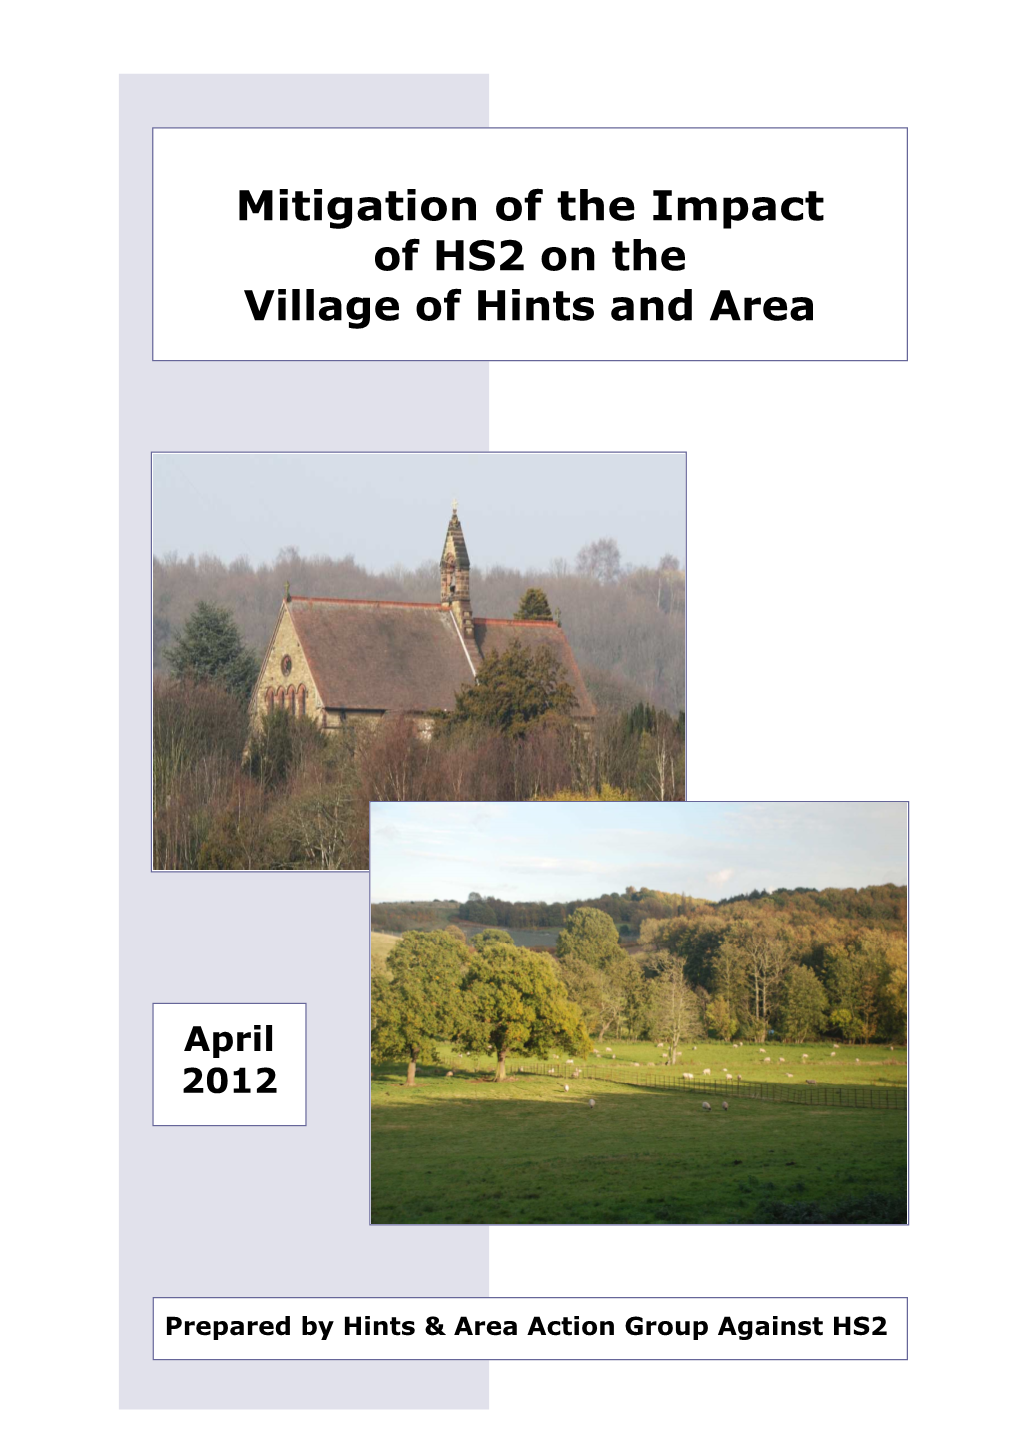 Mitigation of the Impact of HS2 on the Village of Hints and Area